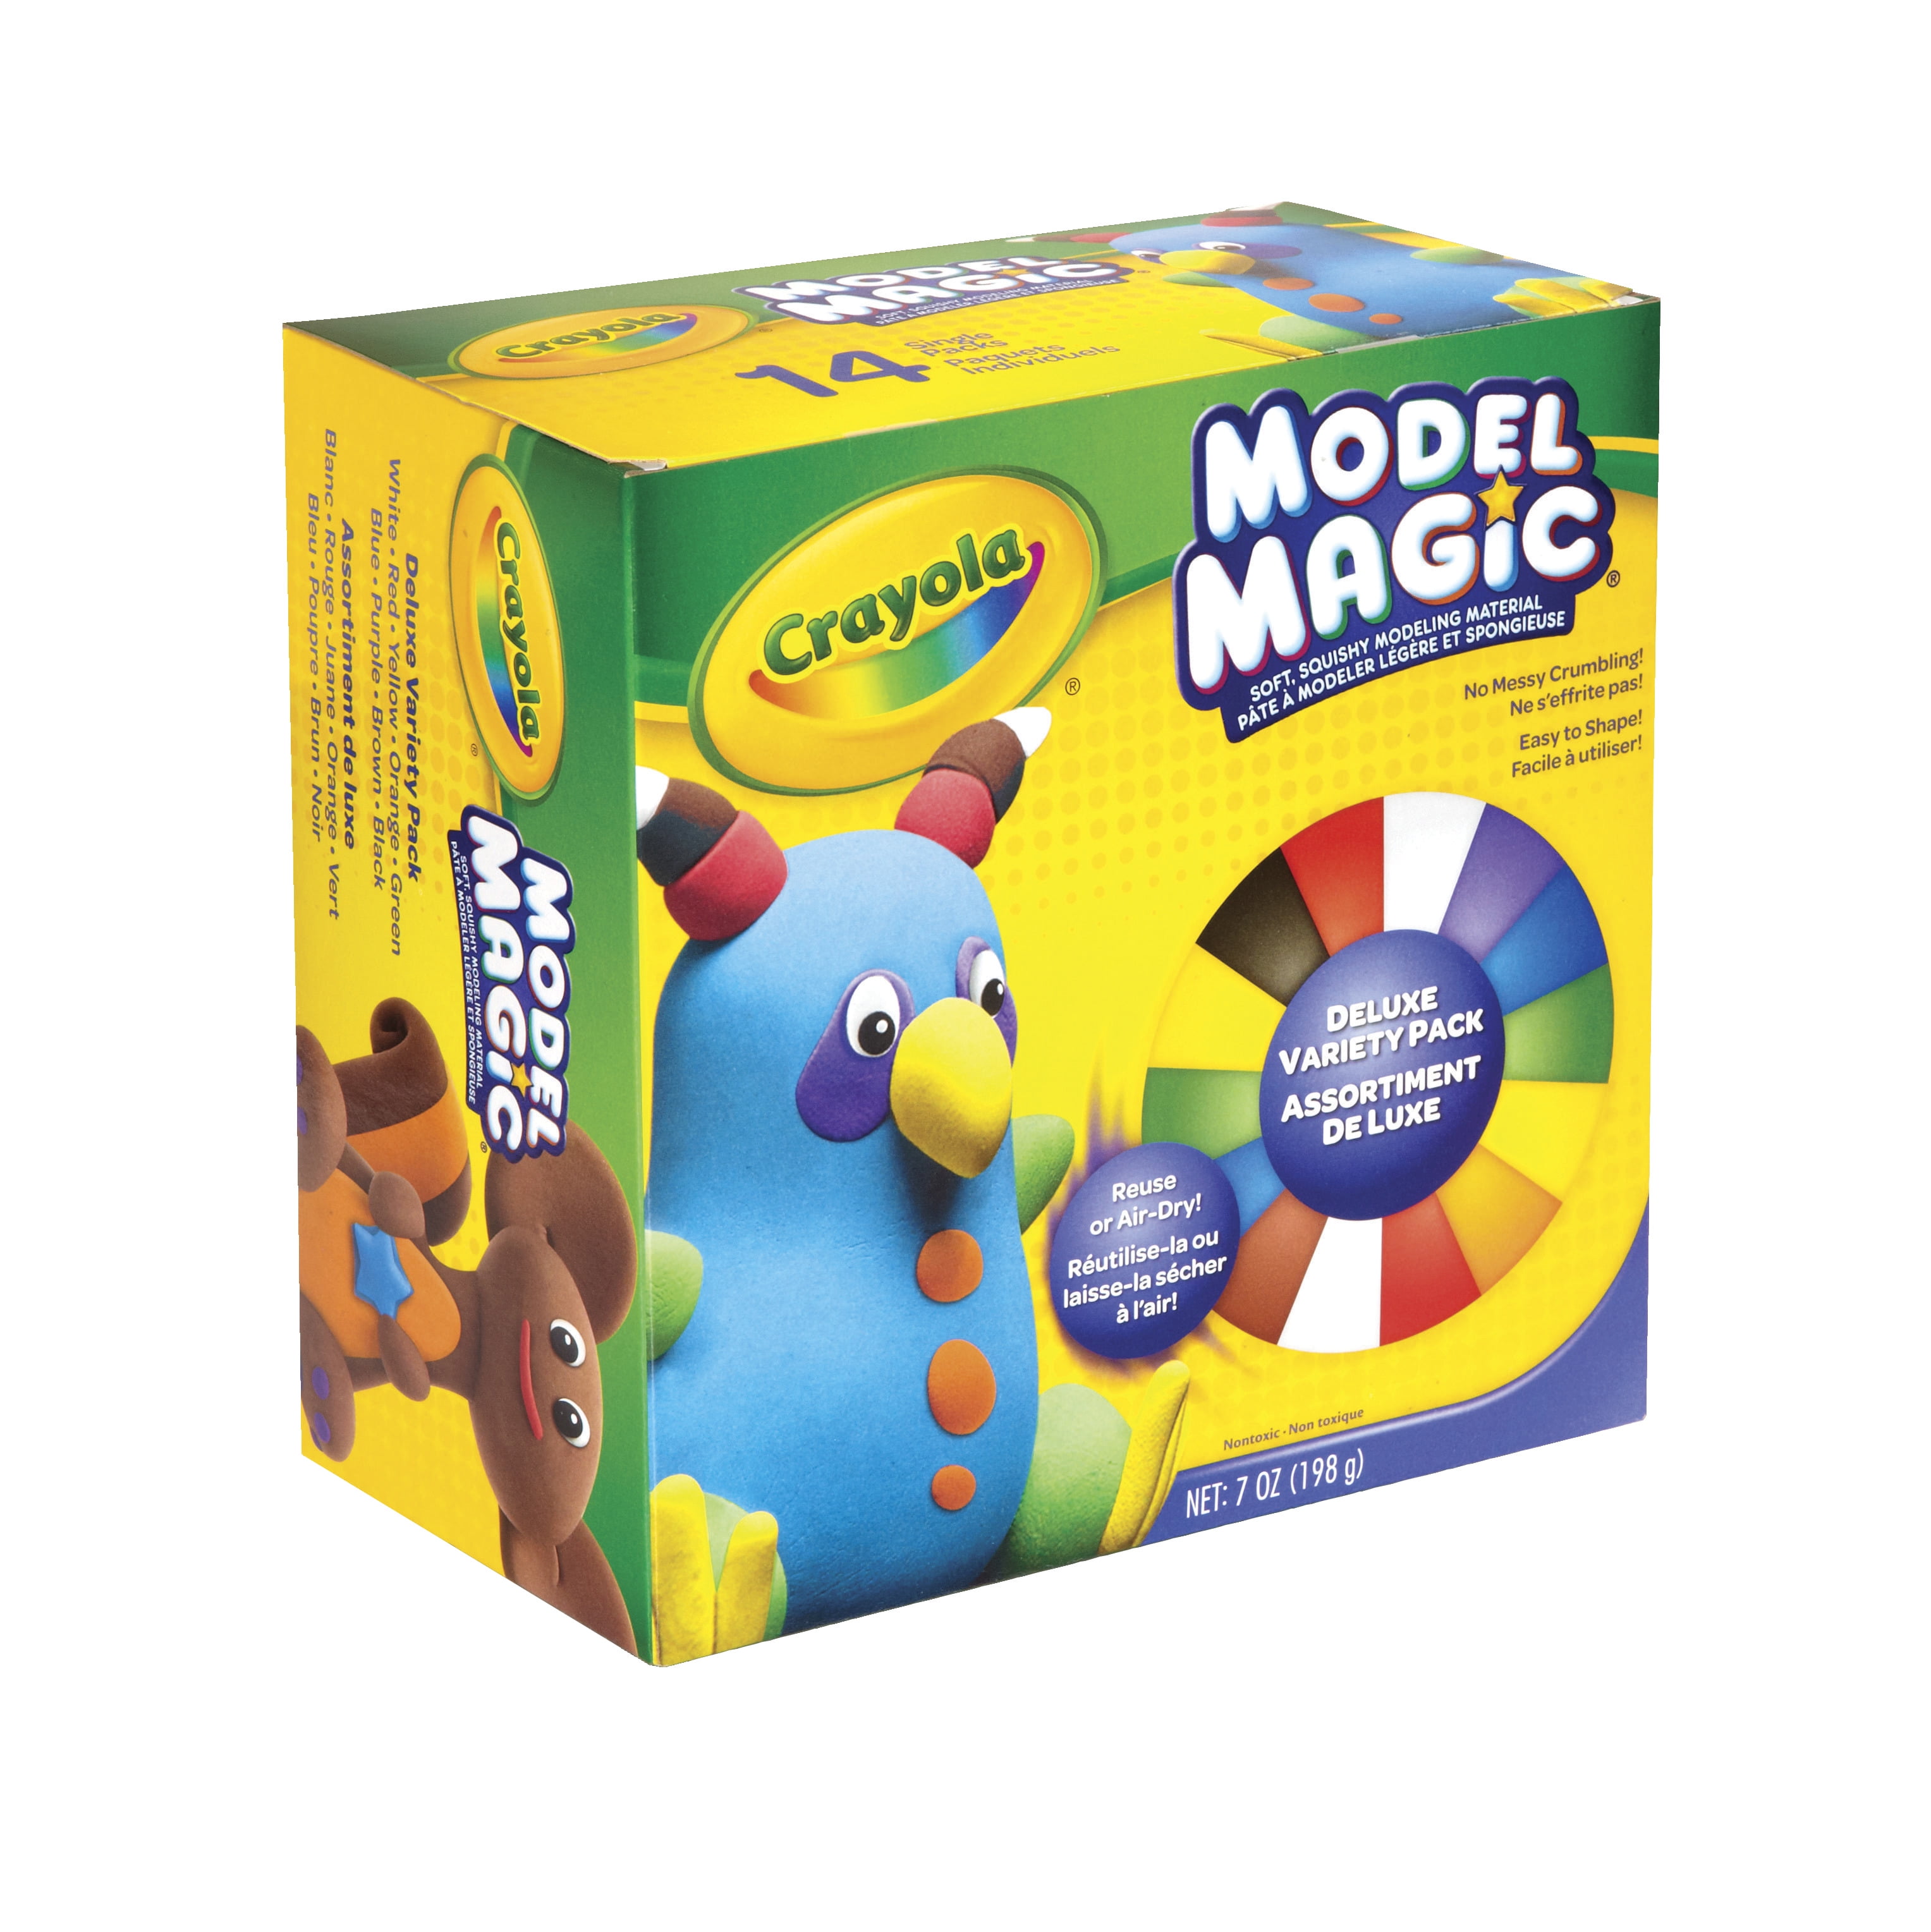 Crayola Model Magic Modeling Compound, 8 oz Packs, 4 Packs, Assorted Natural Colors, 2 lbs